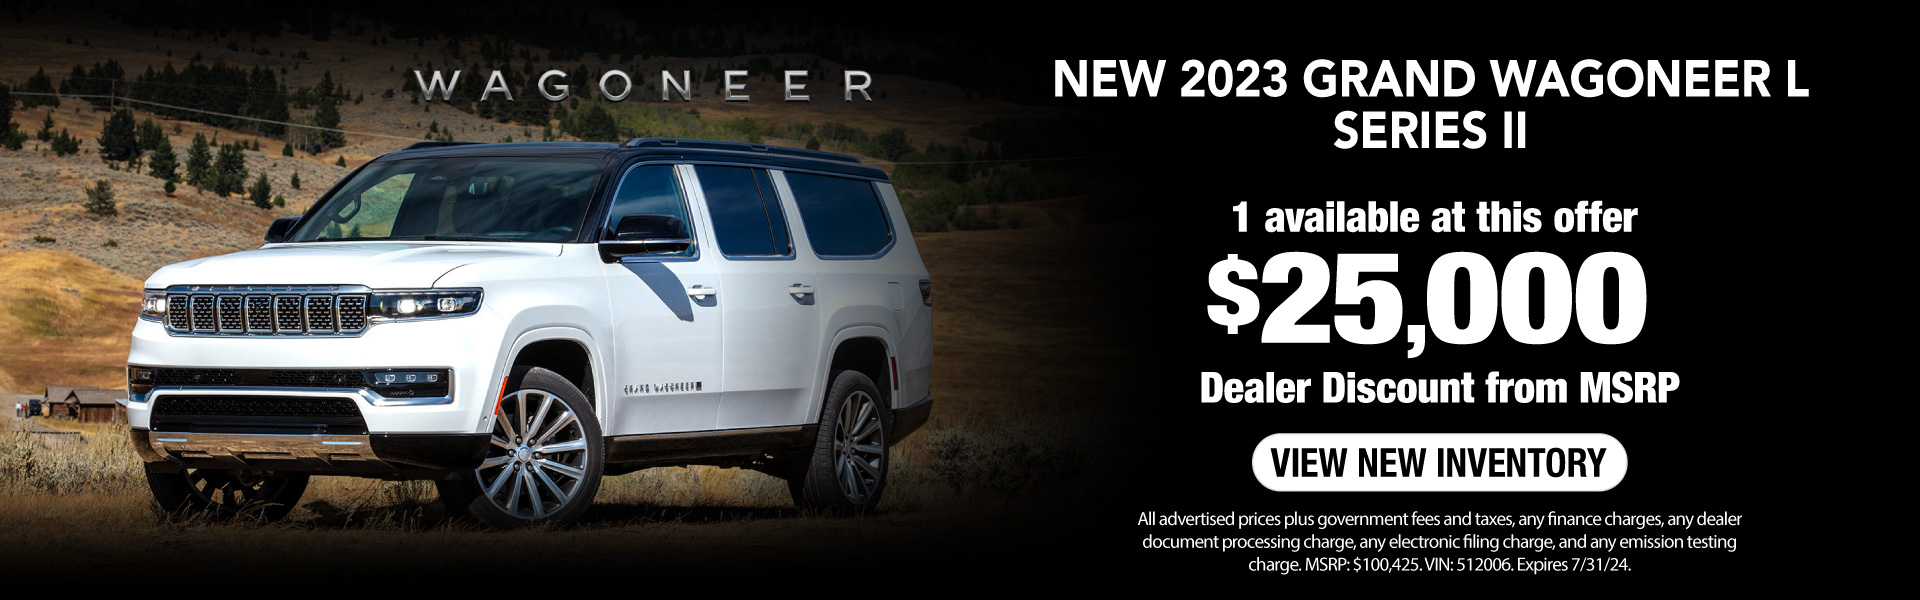 Get a New 2023 Grand Wagoneer L Series II with a $25,000 Dealer Discount from MSRP! Expires 7/31/24.